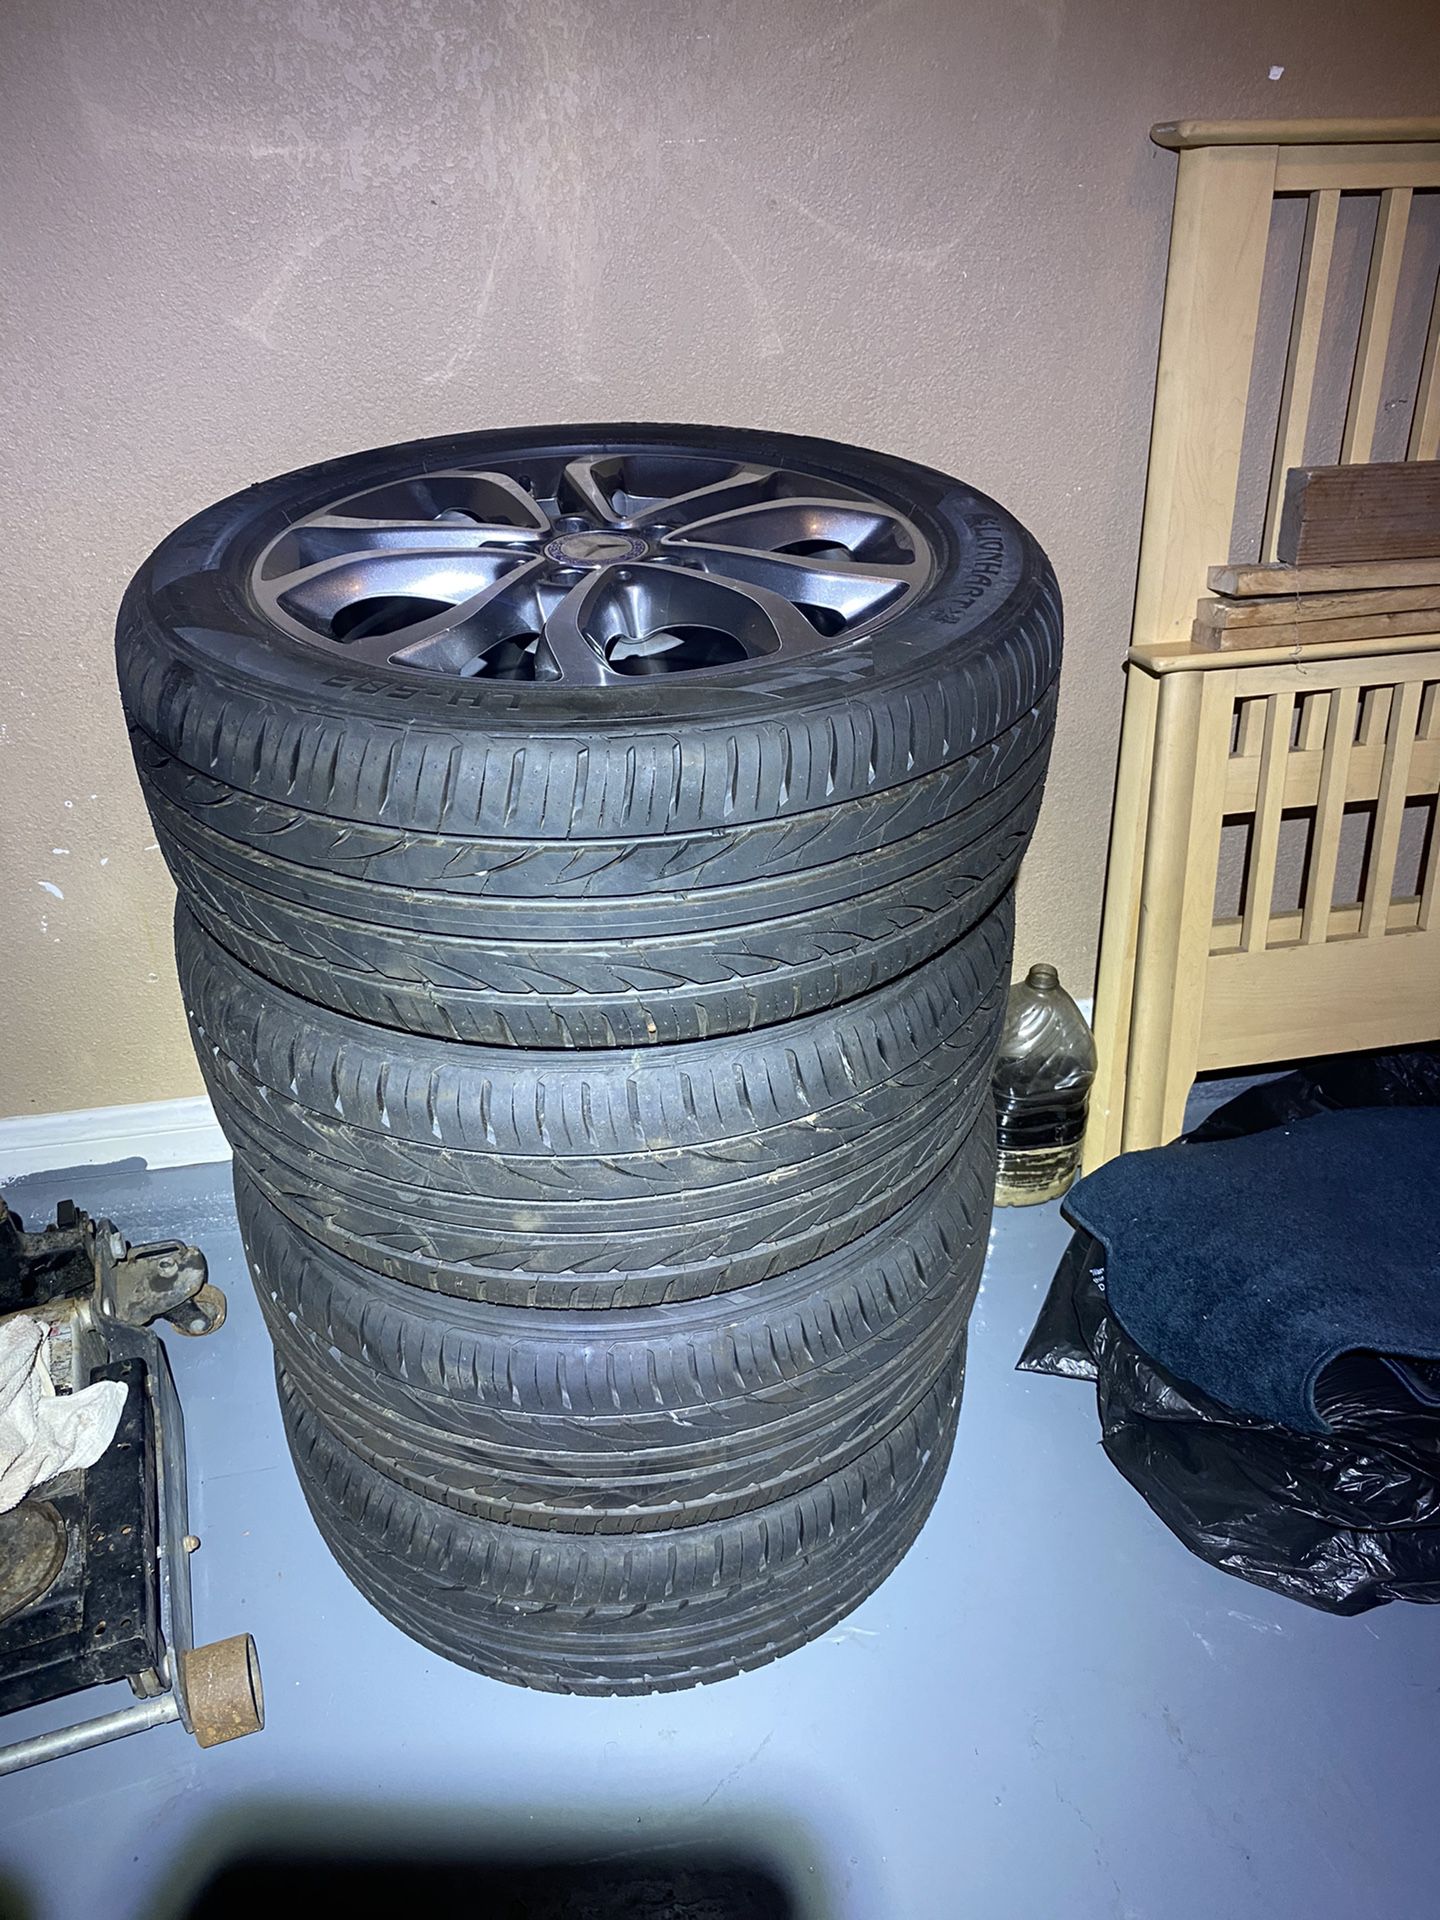 Benz C300 new tires and rims in exchange for Mac Book Pro